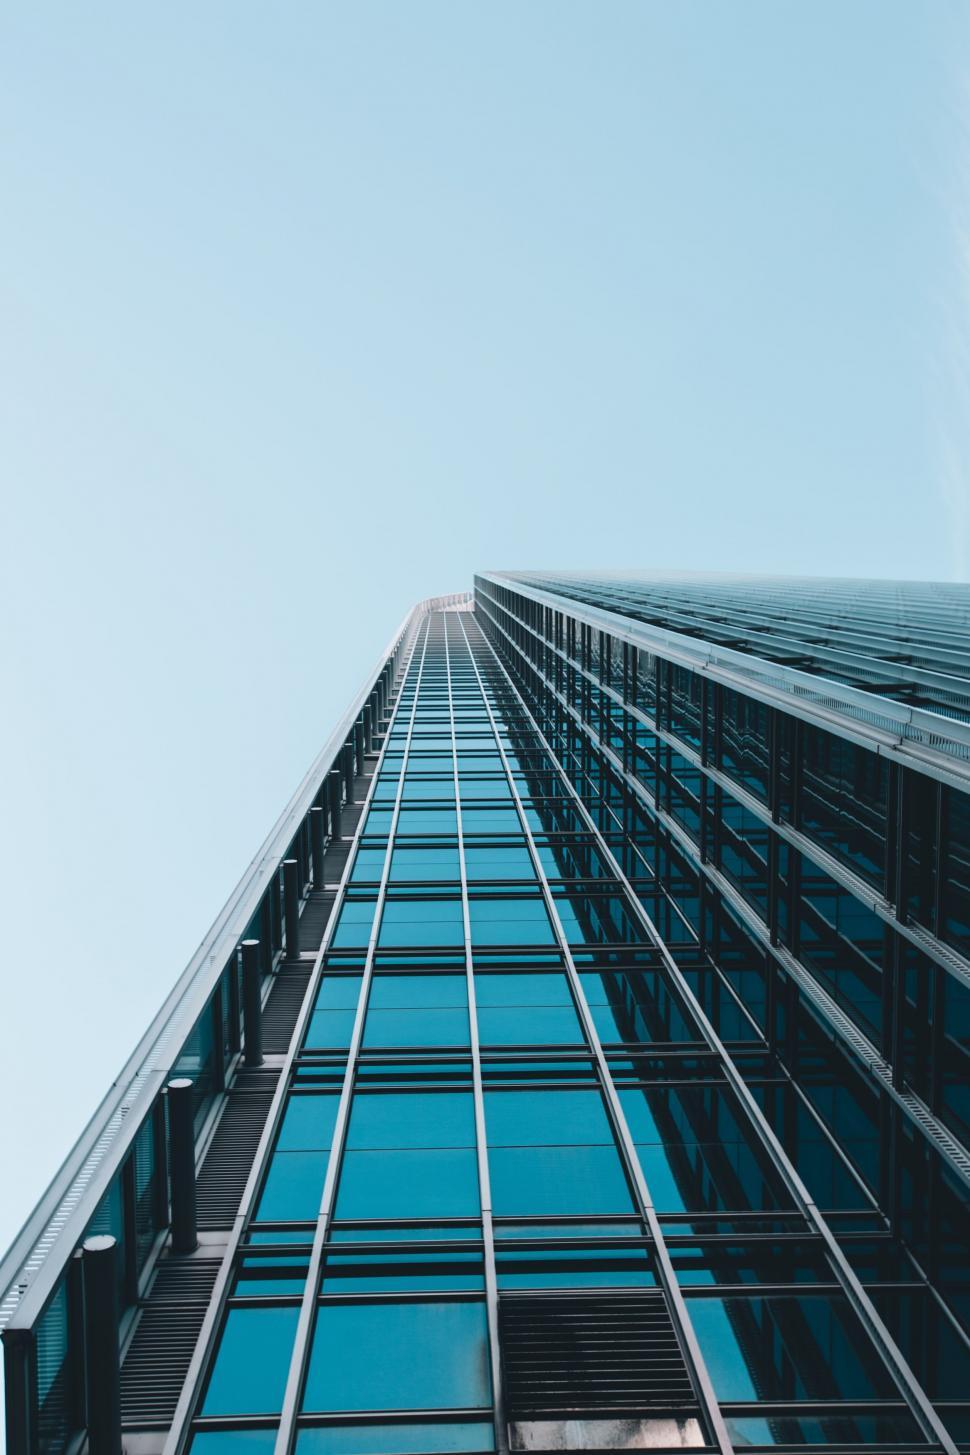 Free Image of Tall Building With Lots of Windows Against Blue Sky 